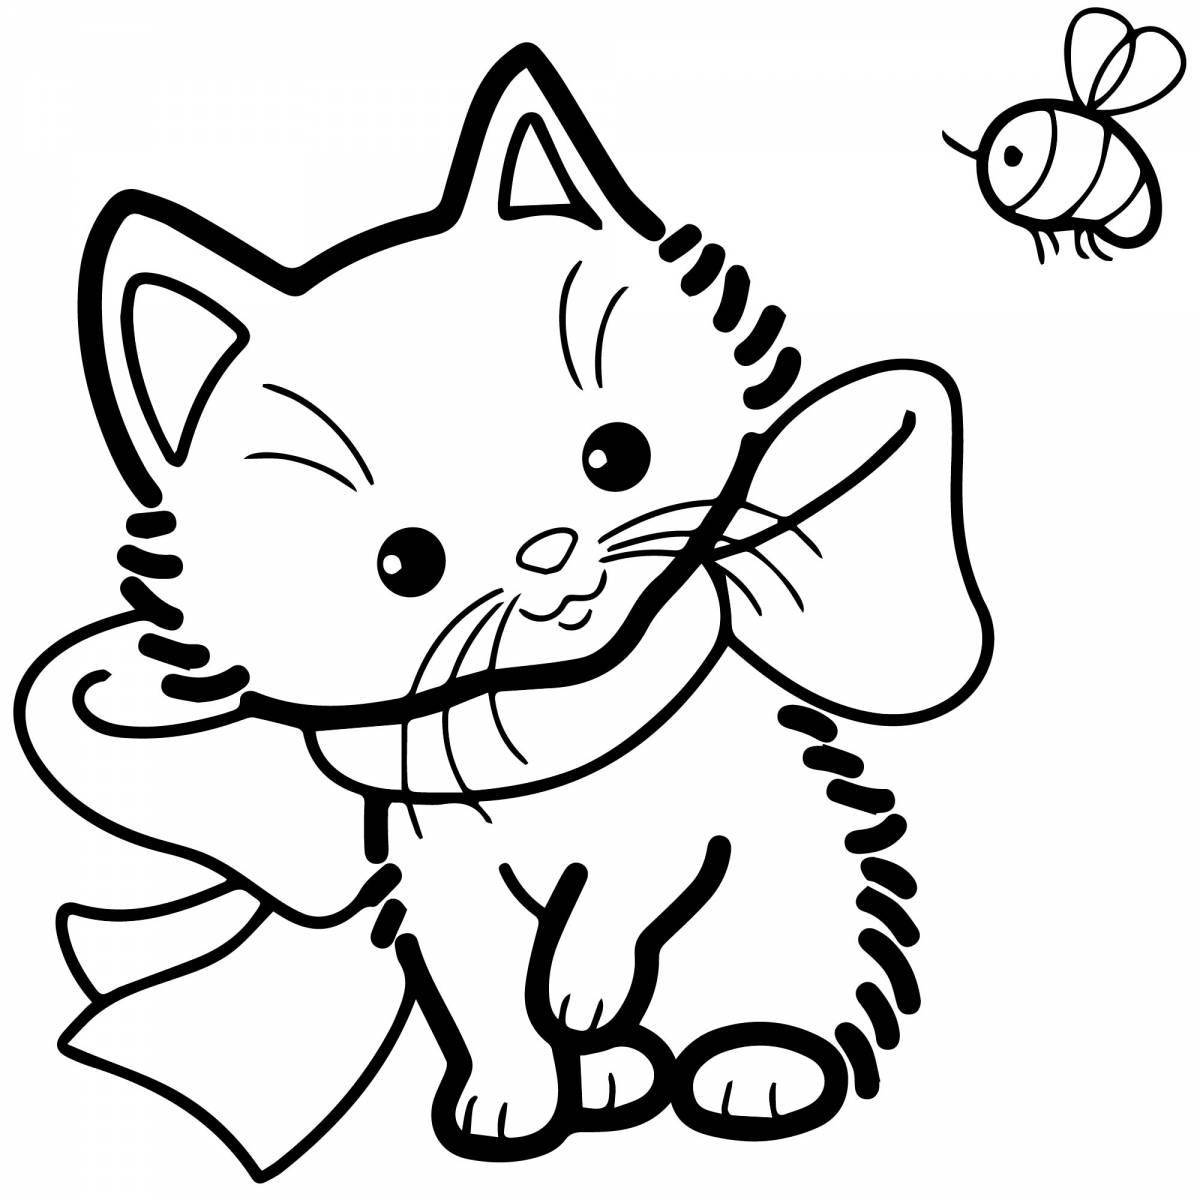 Coloring book of a cheerful 7-year-old kitten